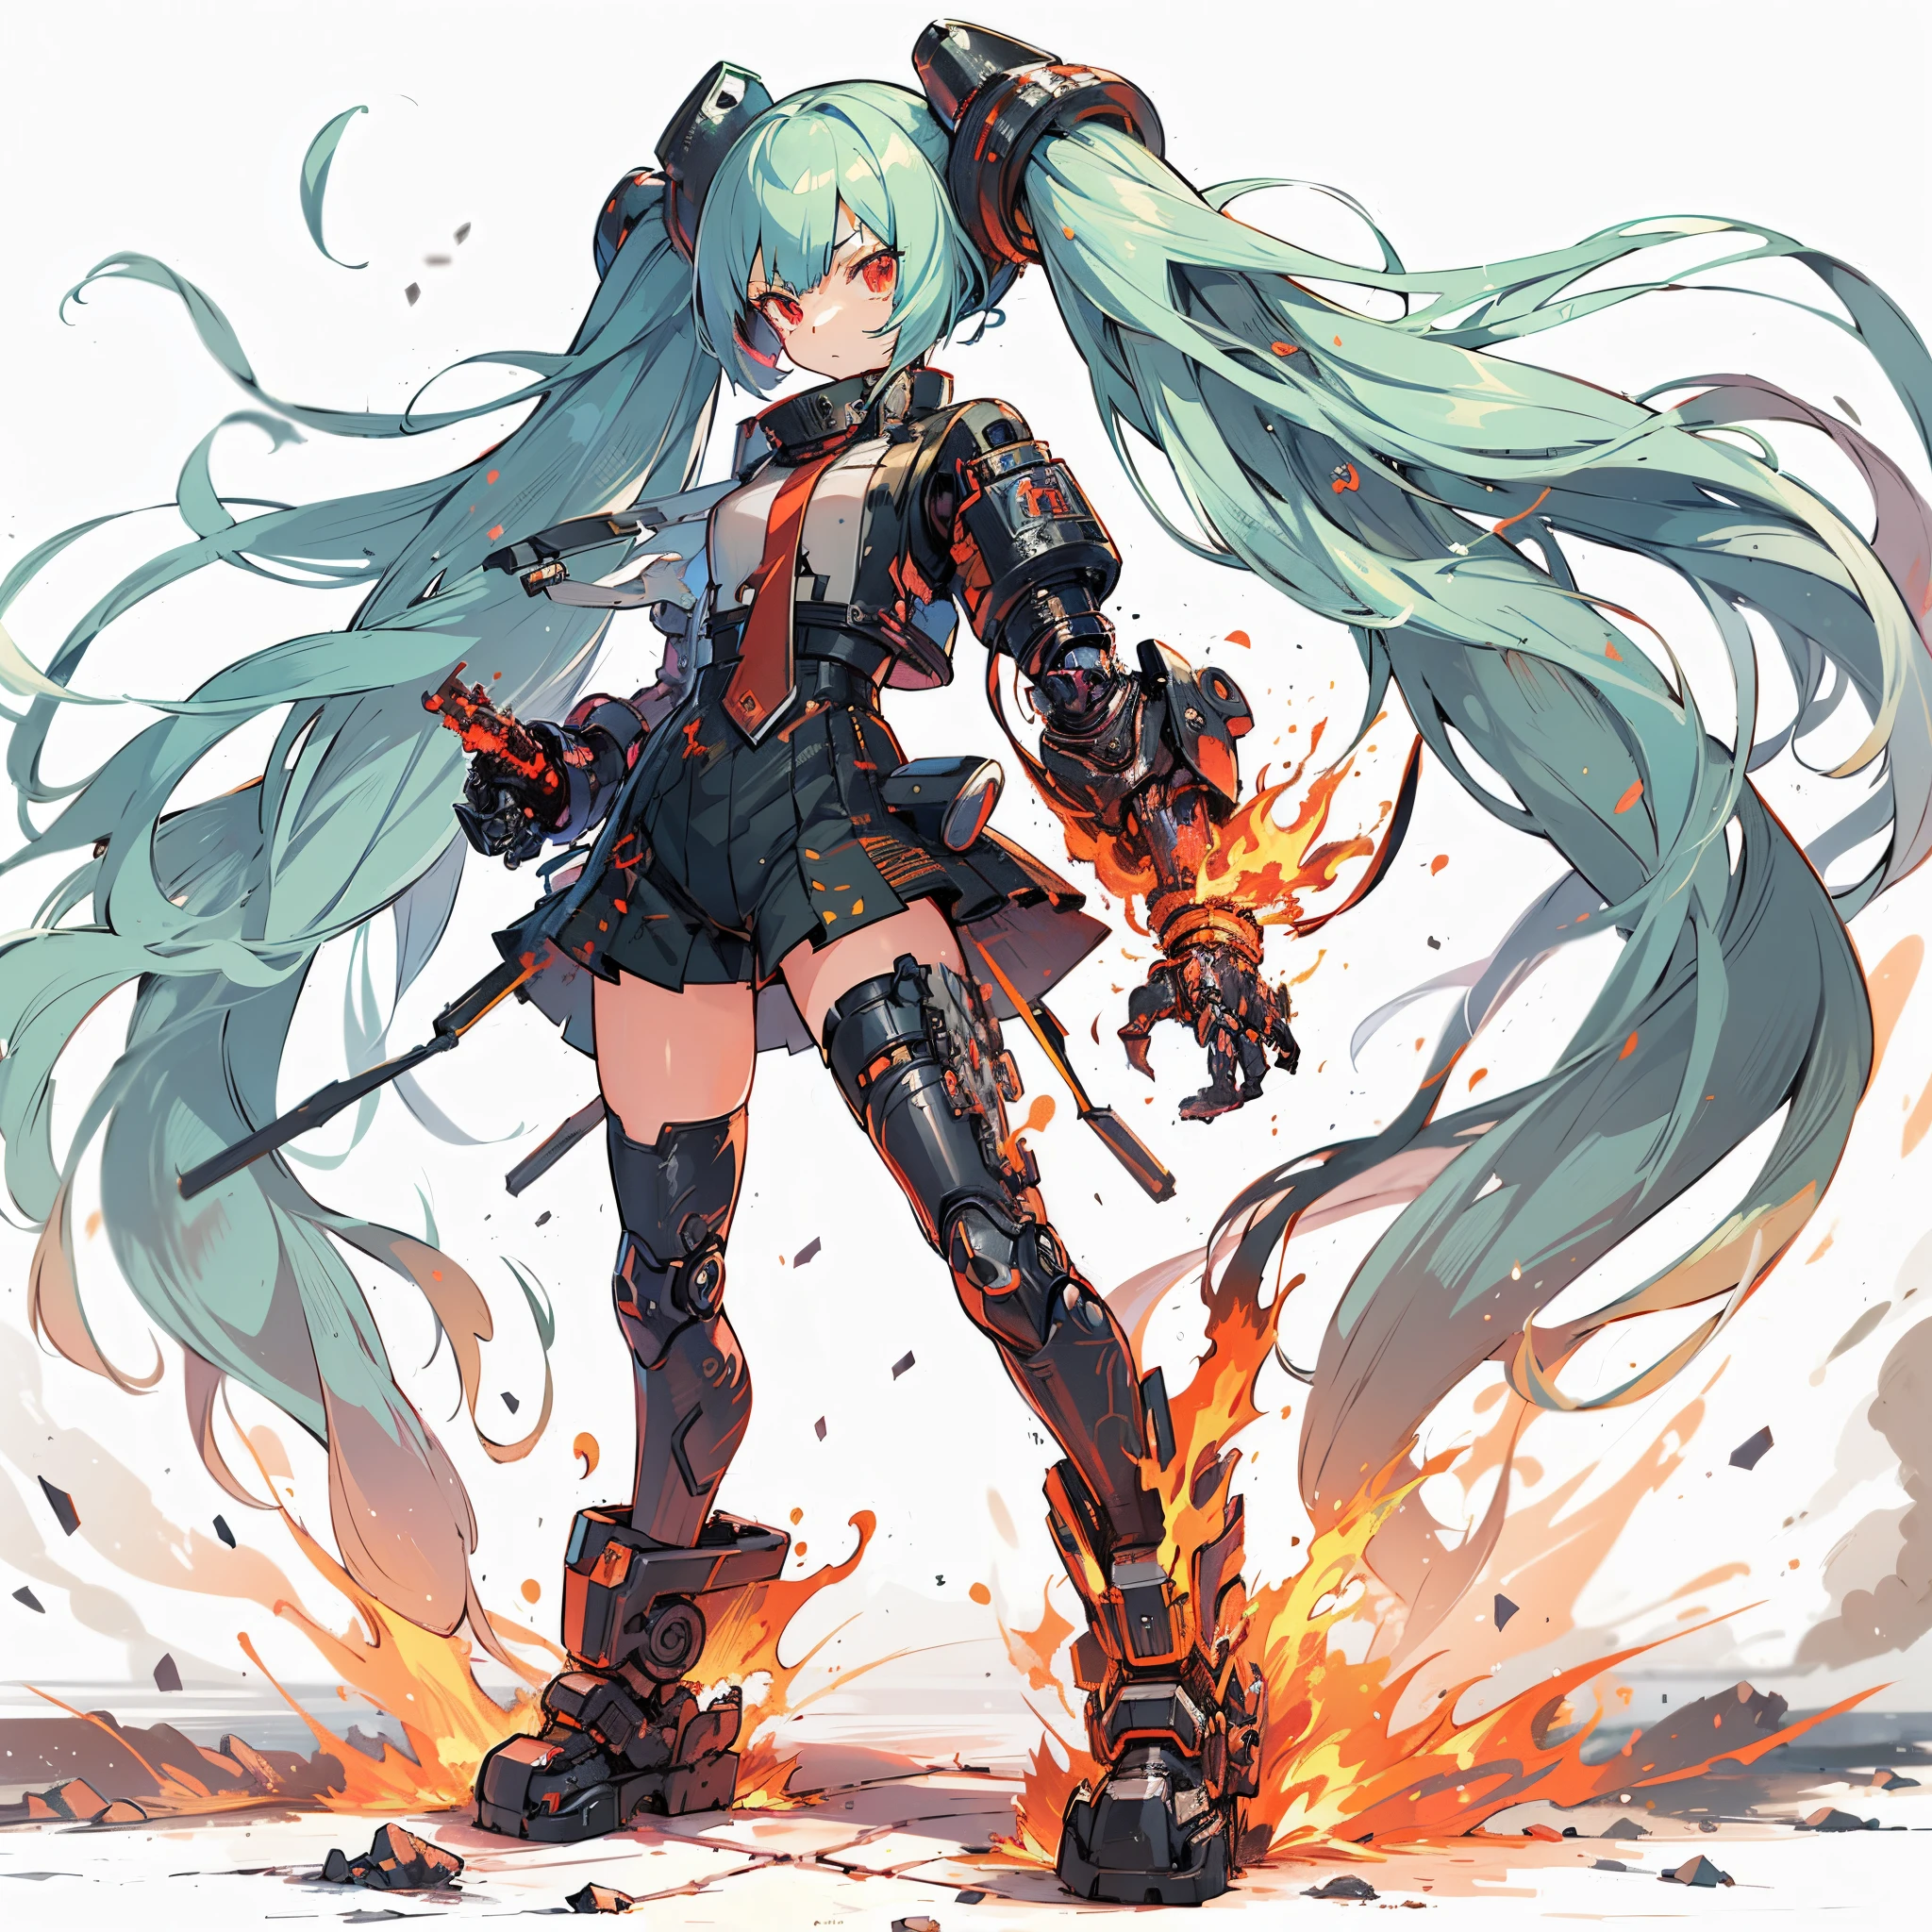 (masutepiece), (Perfect athlete body:1.2), Anime style, Full body, Cyberpunk Girl, Sea green twin hairstyle with red eyes, cyberpunk outfits, black purple flame fist, Burnt mechanical limbs, Standing in the wasteland, White background, Whole body、Bullish look